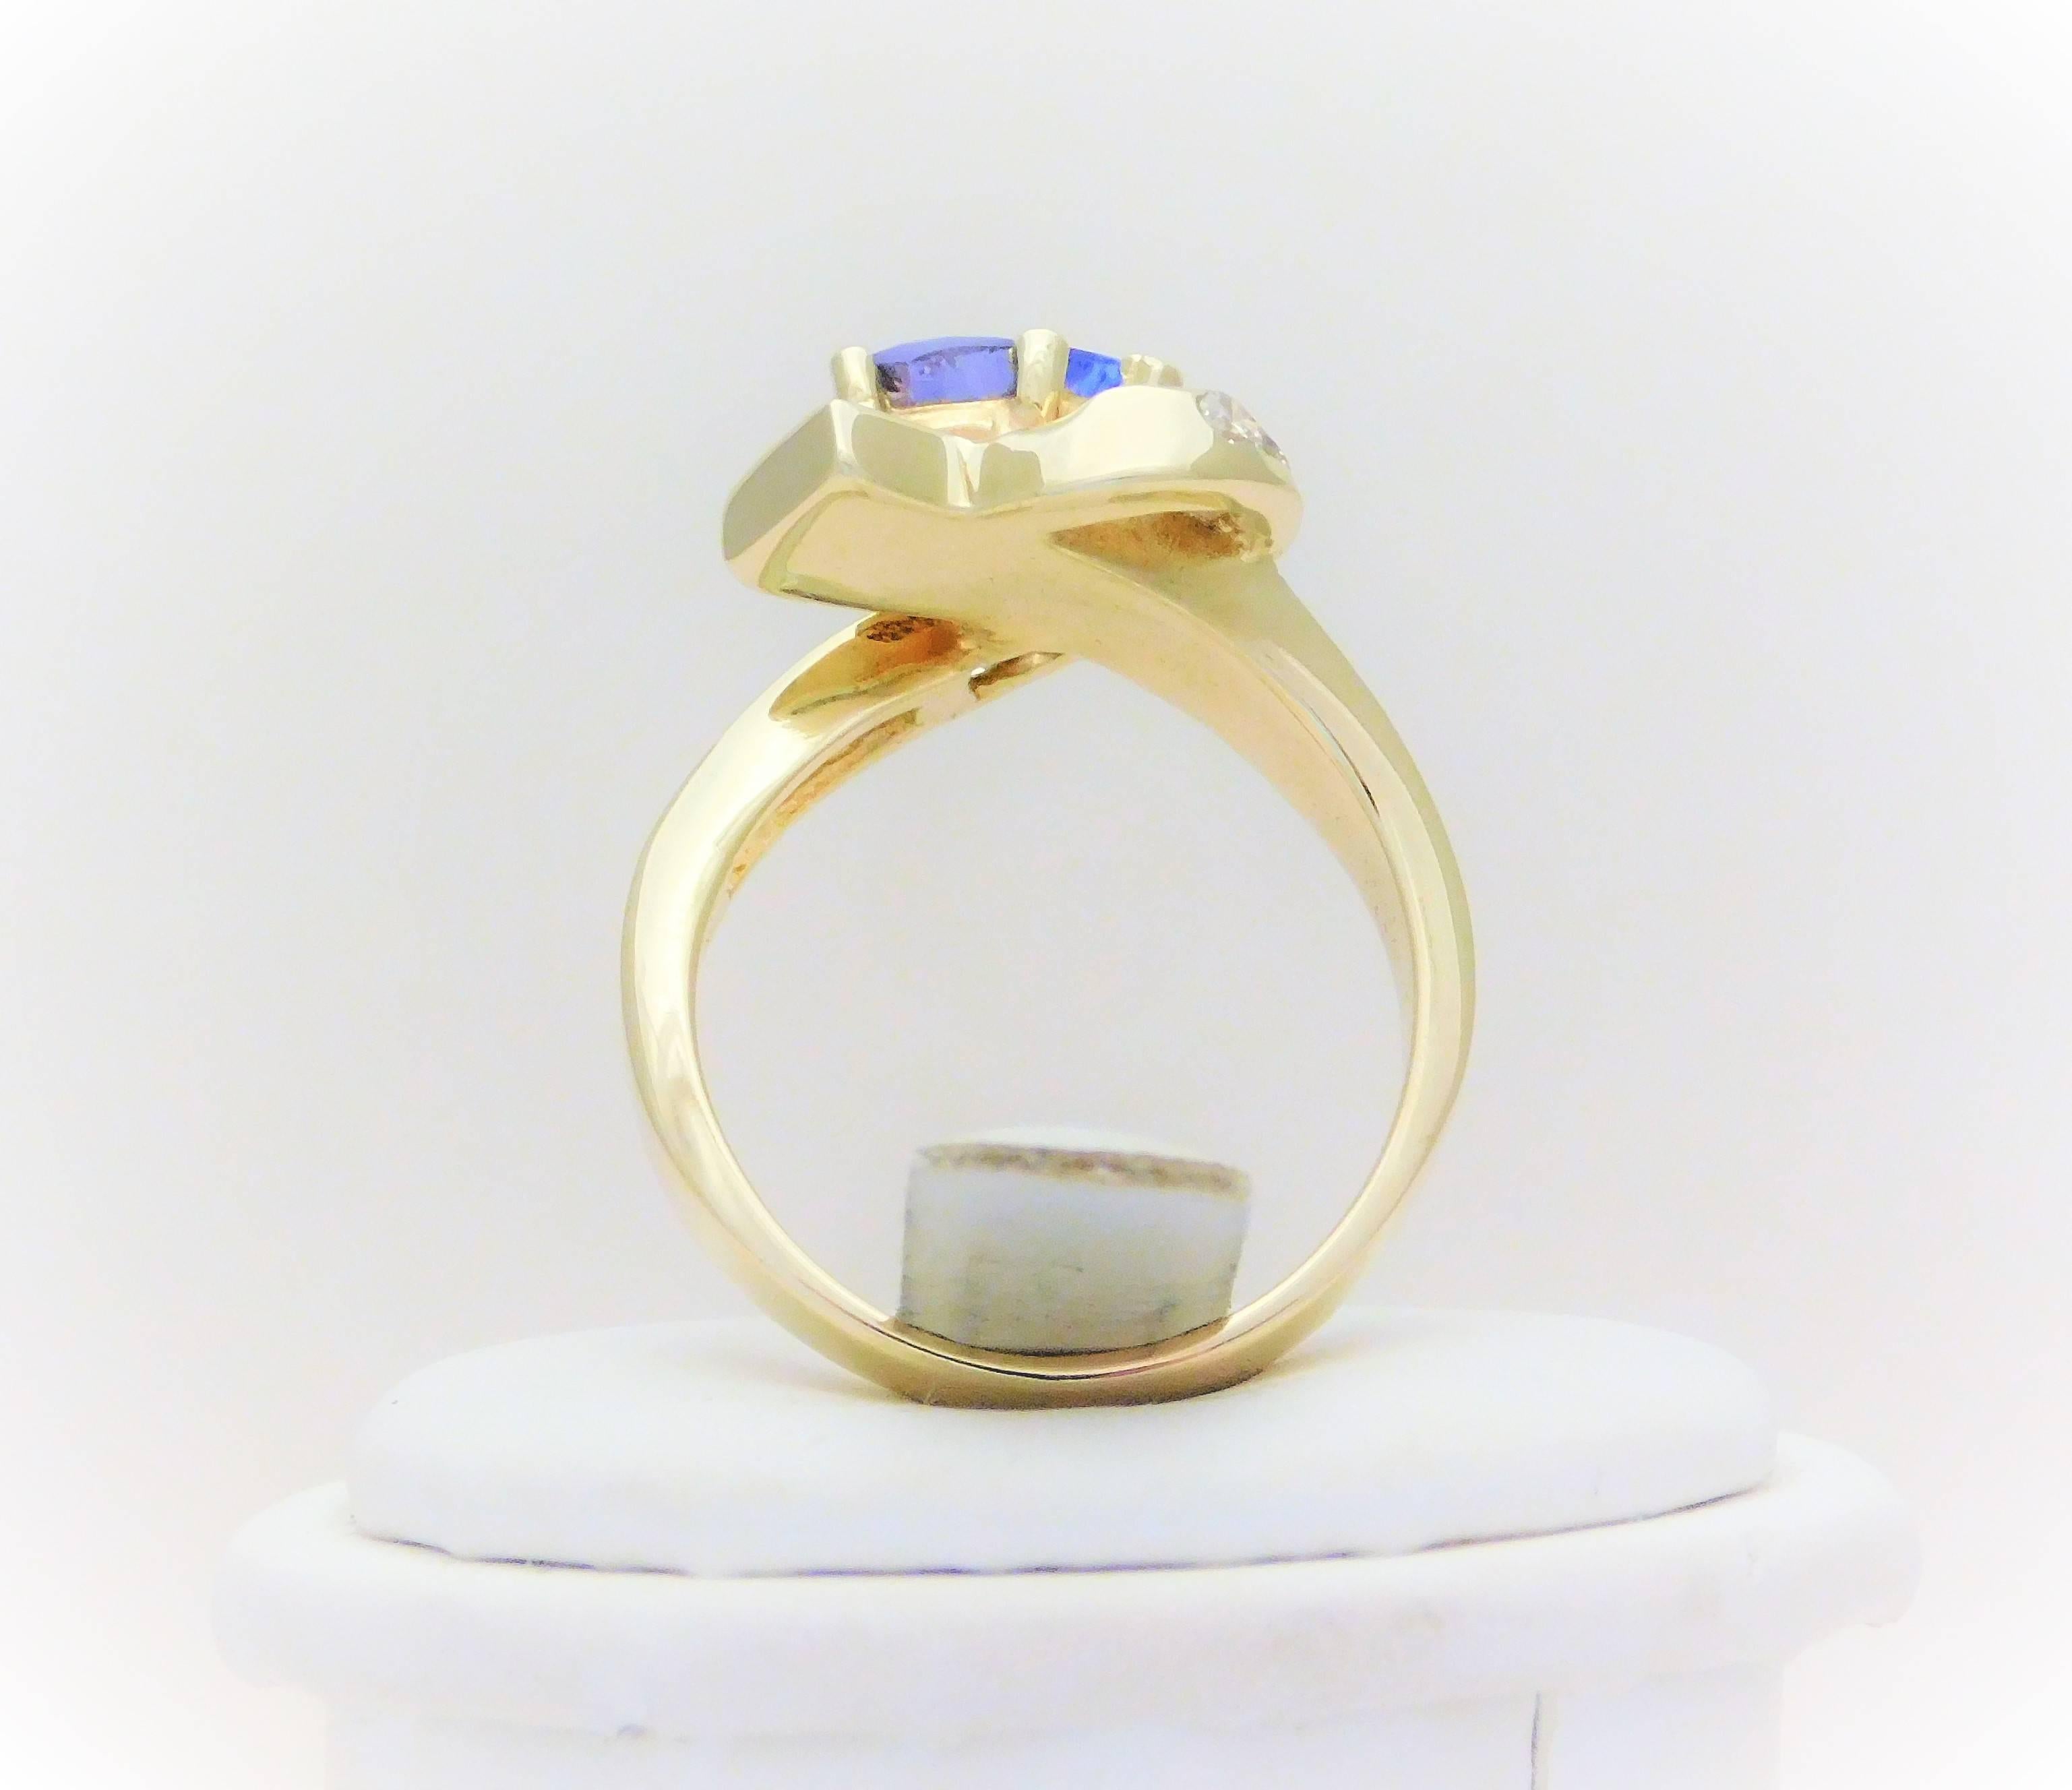 Vintage 2.05 Carat Pear-Cut Tanzanite and Diamond Cocktail Ring In Excellent Condition For Sale In Metairie, LA